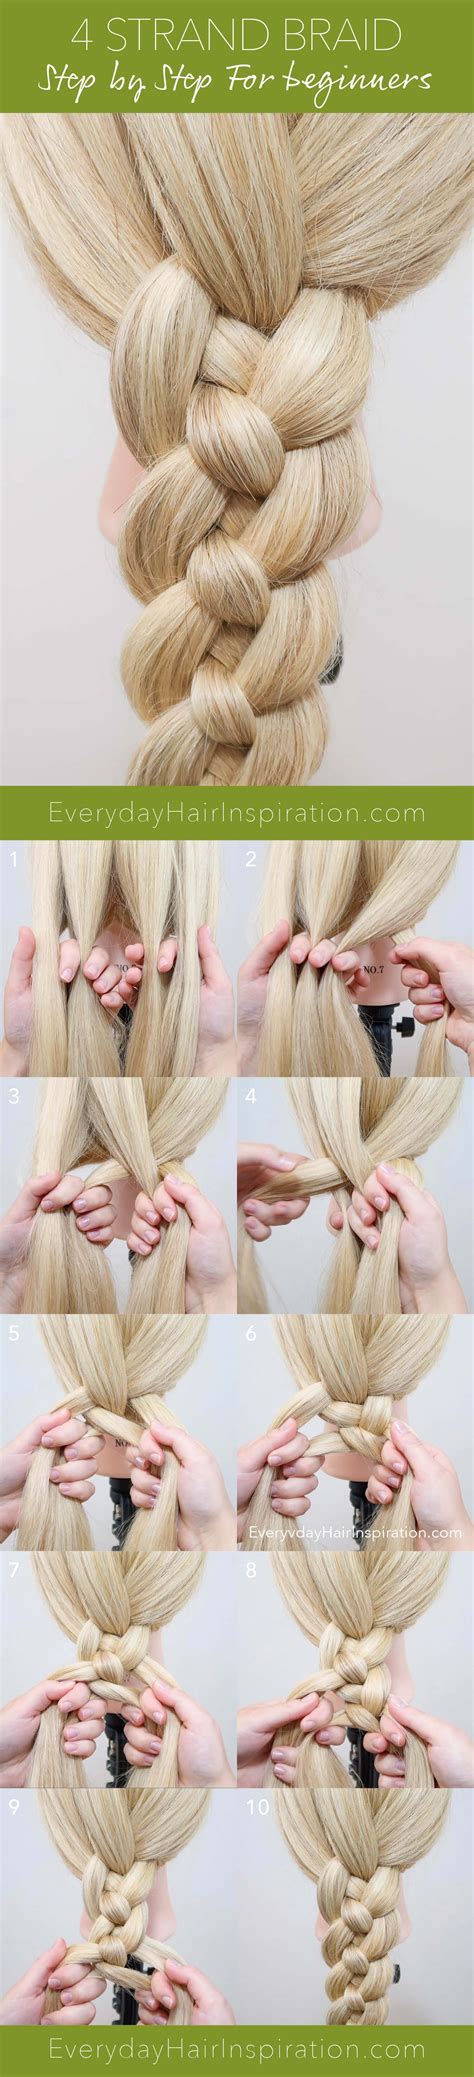 For me, though, braids are definitely my favorite hair look. How To 4 Strand Braid - Everyday Hair inspiration - BRAIDED STYLES